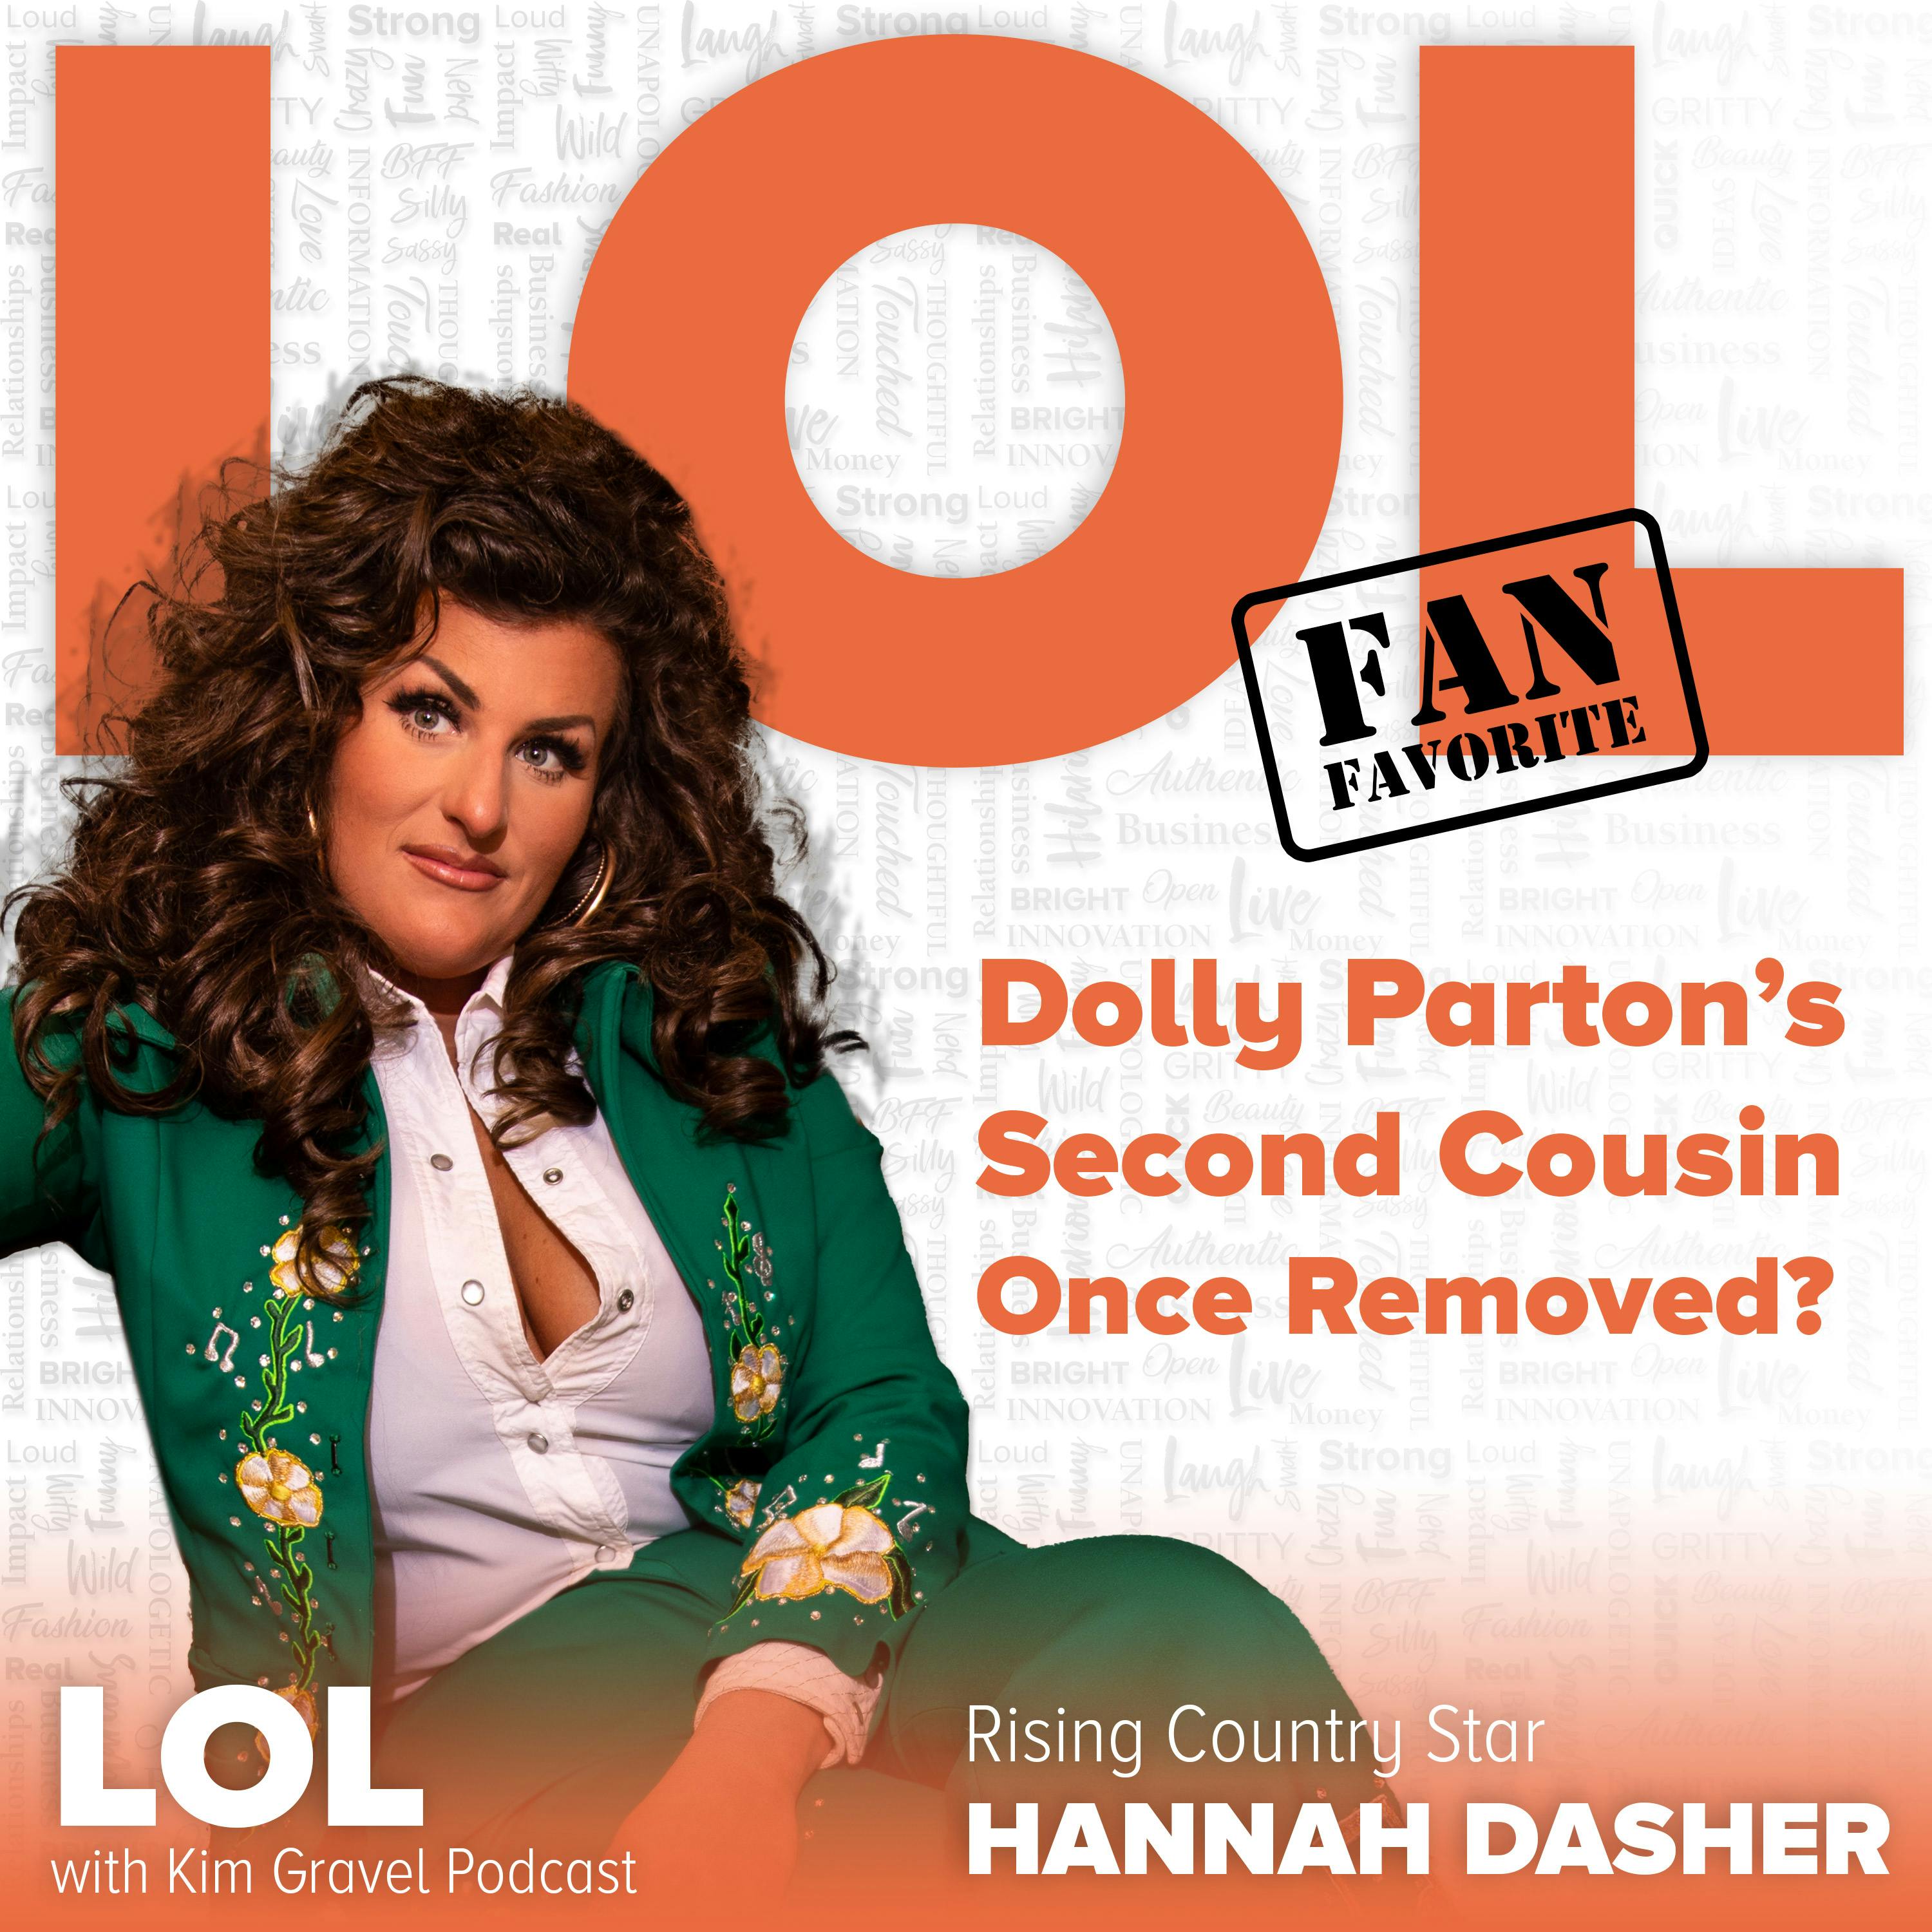 Fan Favorite! Hannah Dasher could be Dolly Parton’s Second Cousin Once Removed?